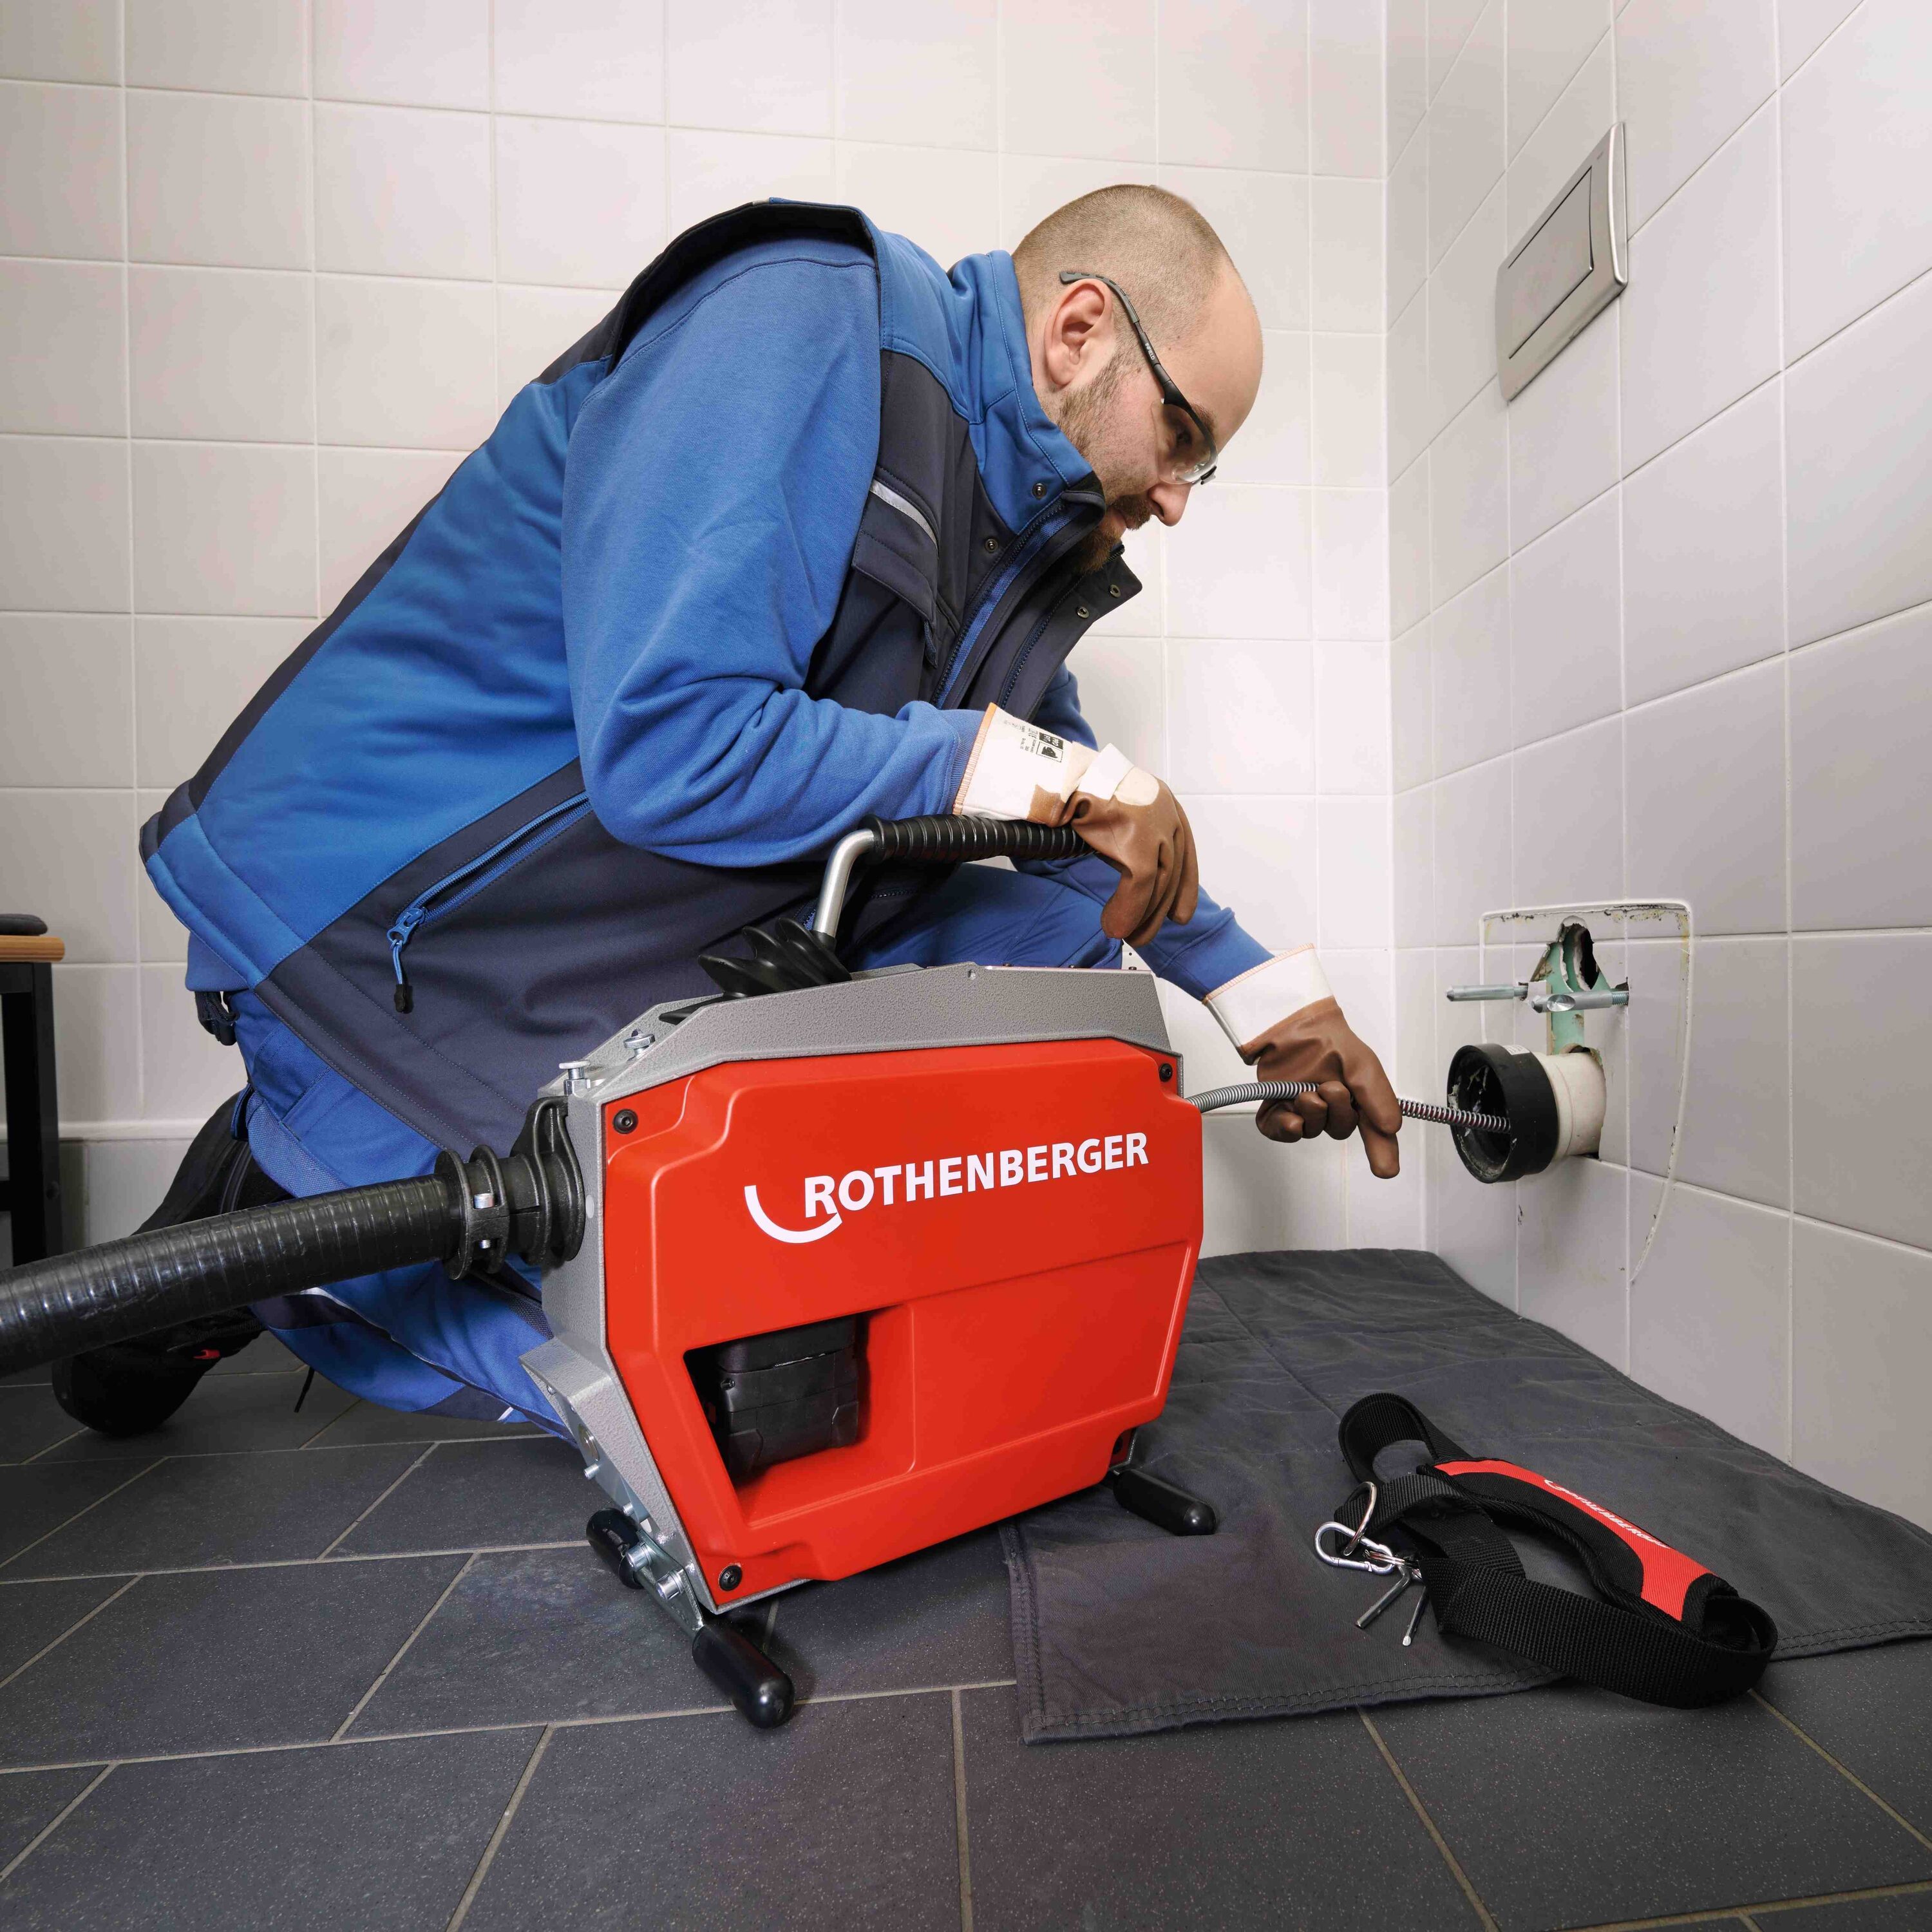 Rothenberger R600 Drain Cleaning Machine With Guide Hose